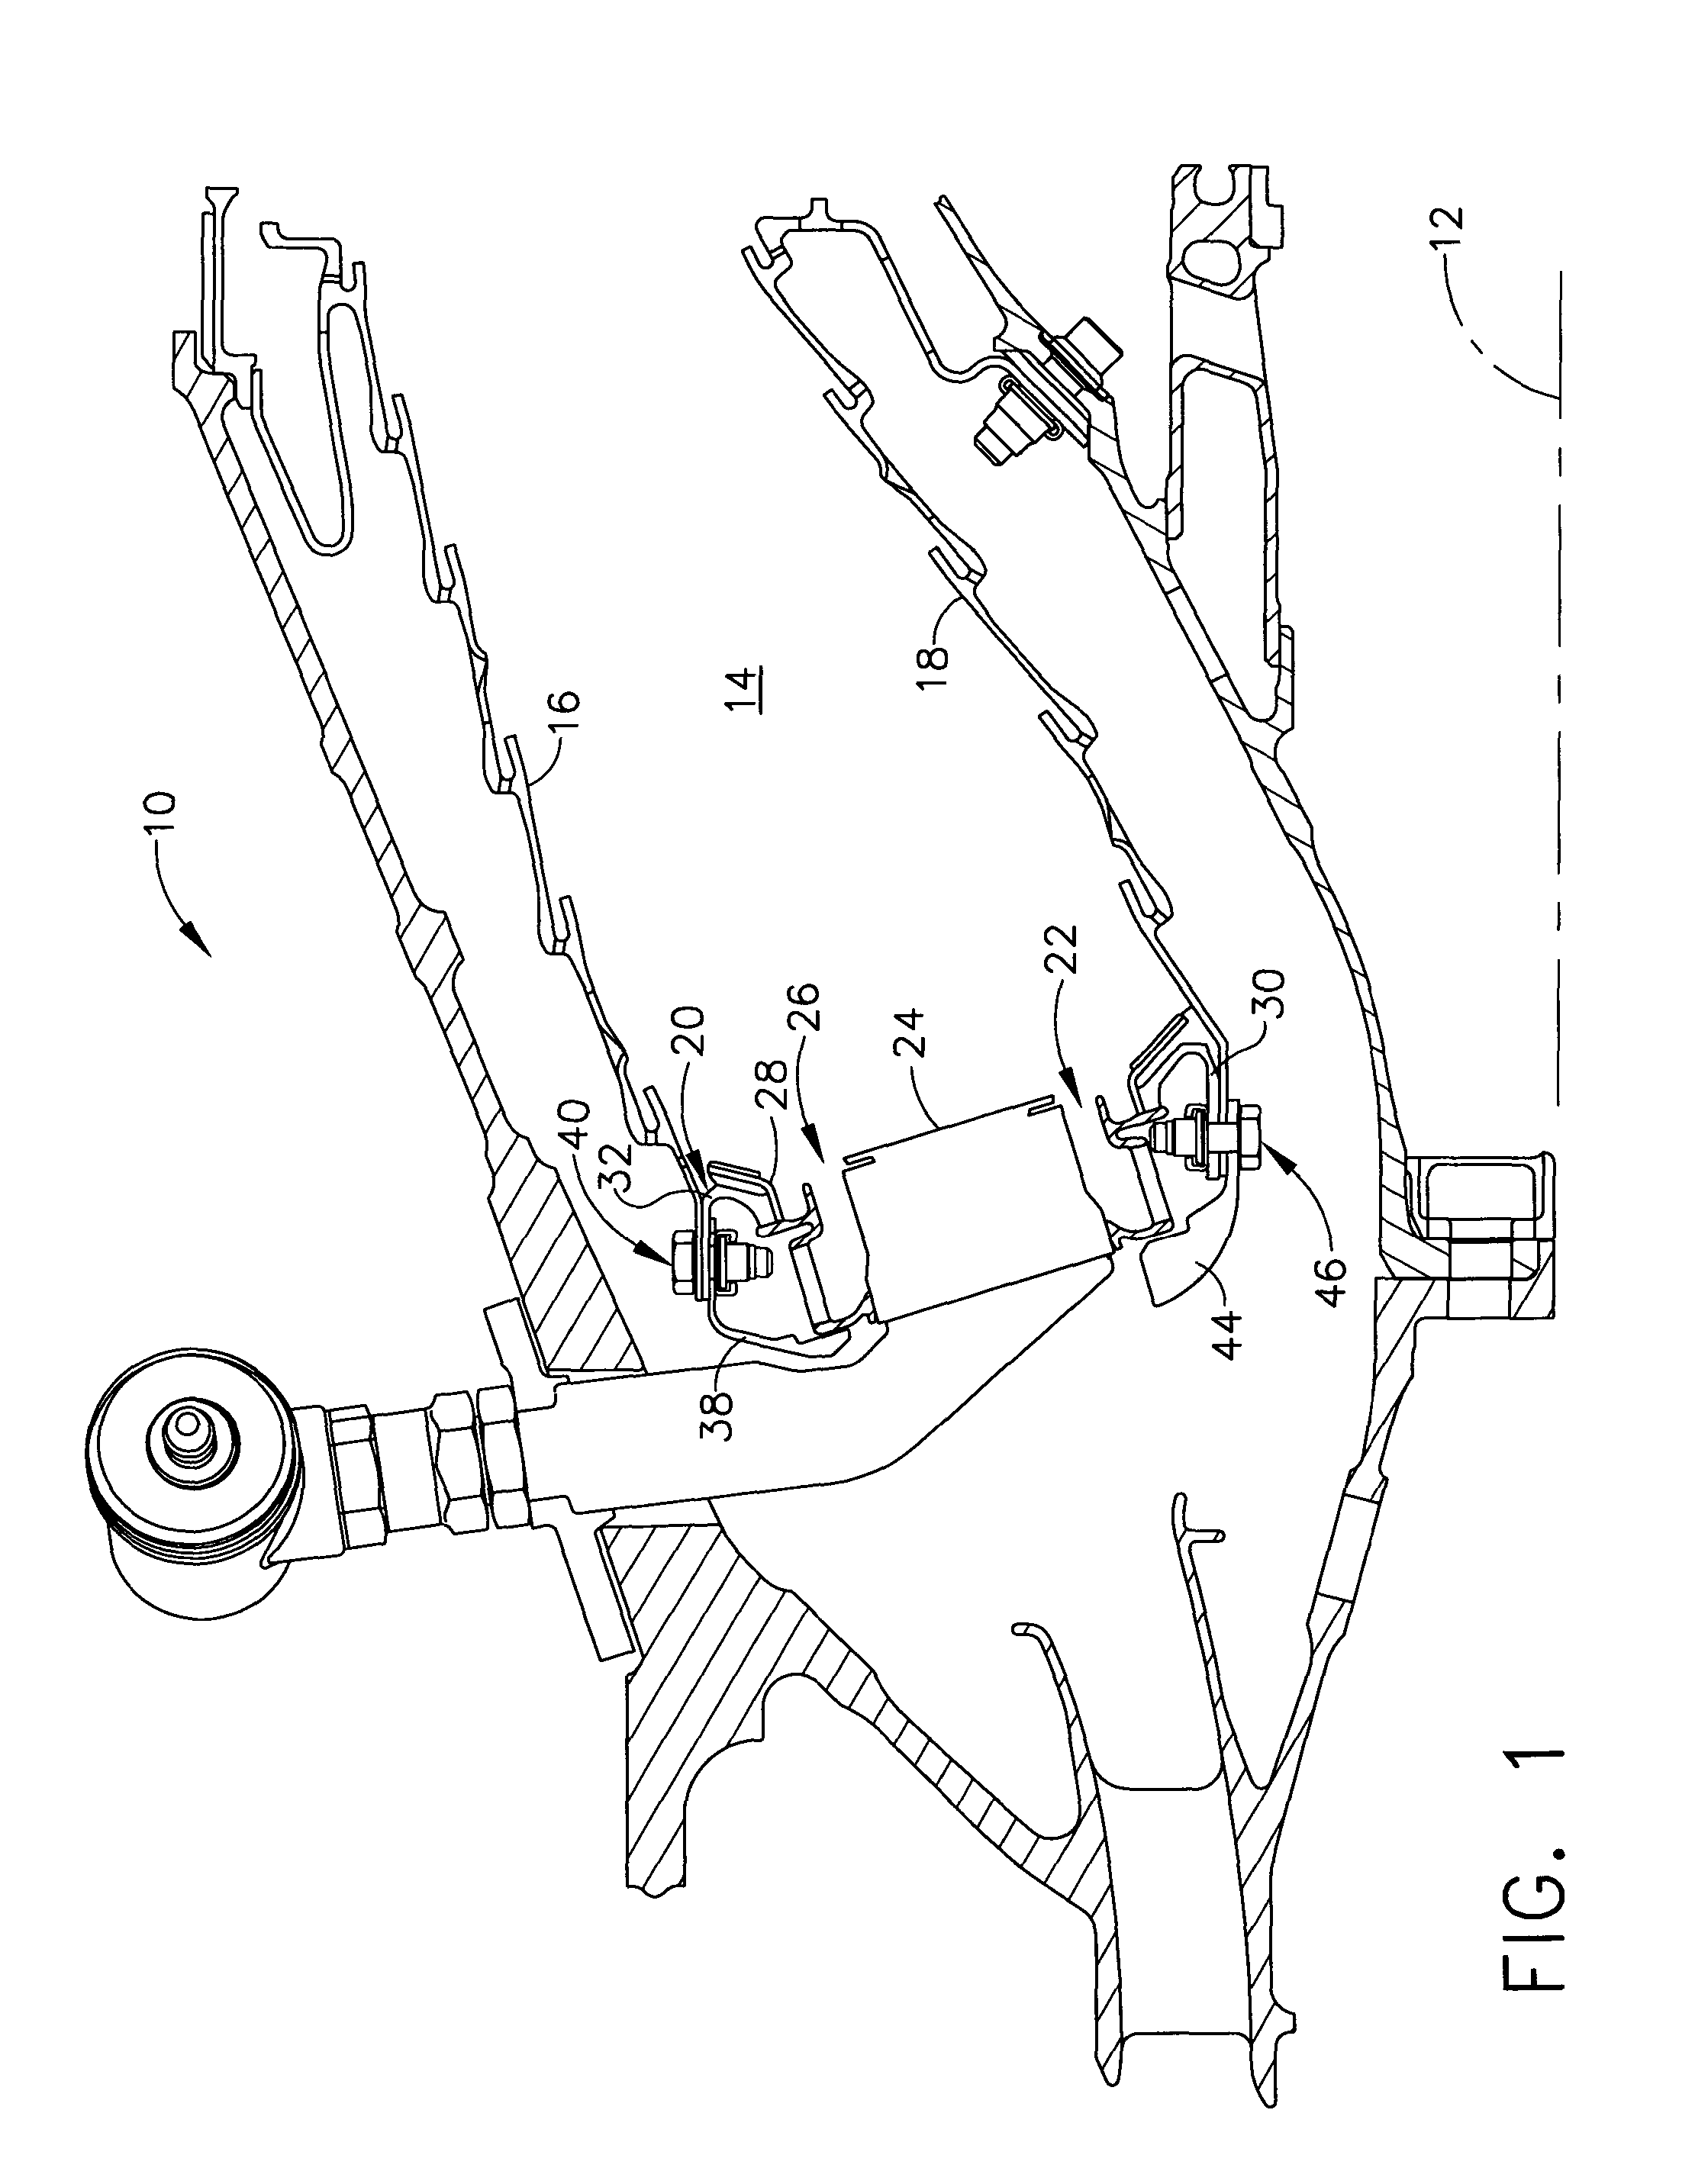 Combustor dome assembly of a gas turbine engine having improved deflector plates